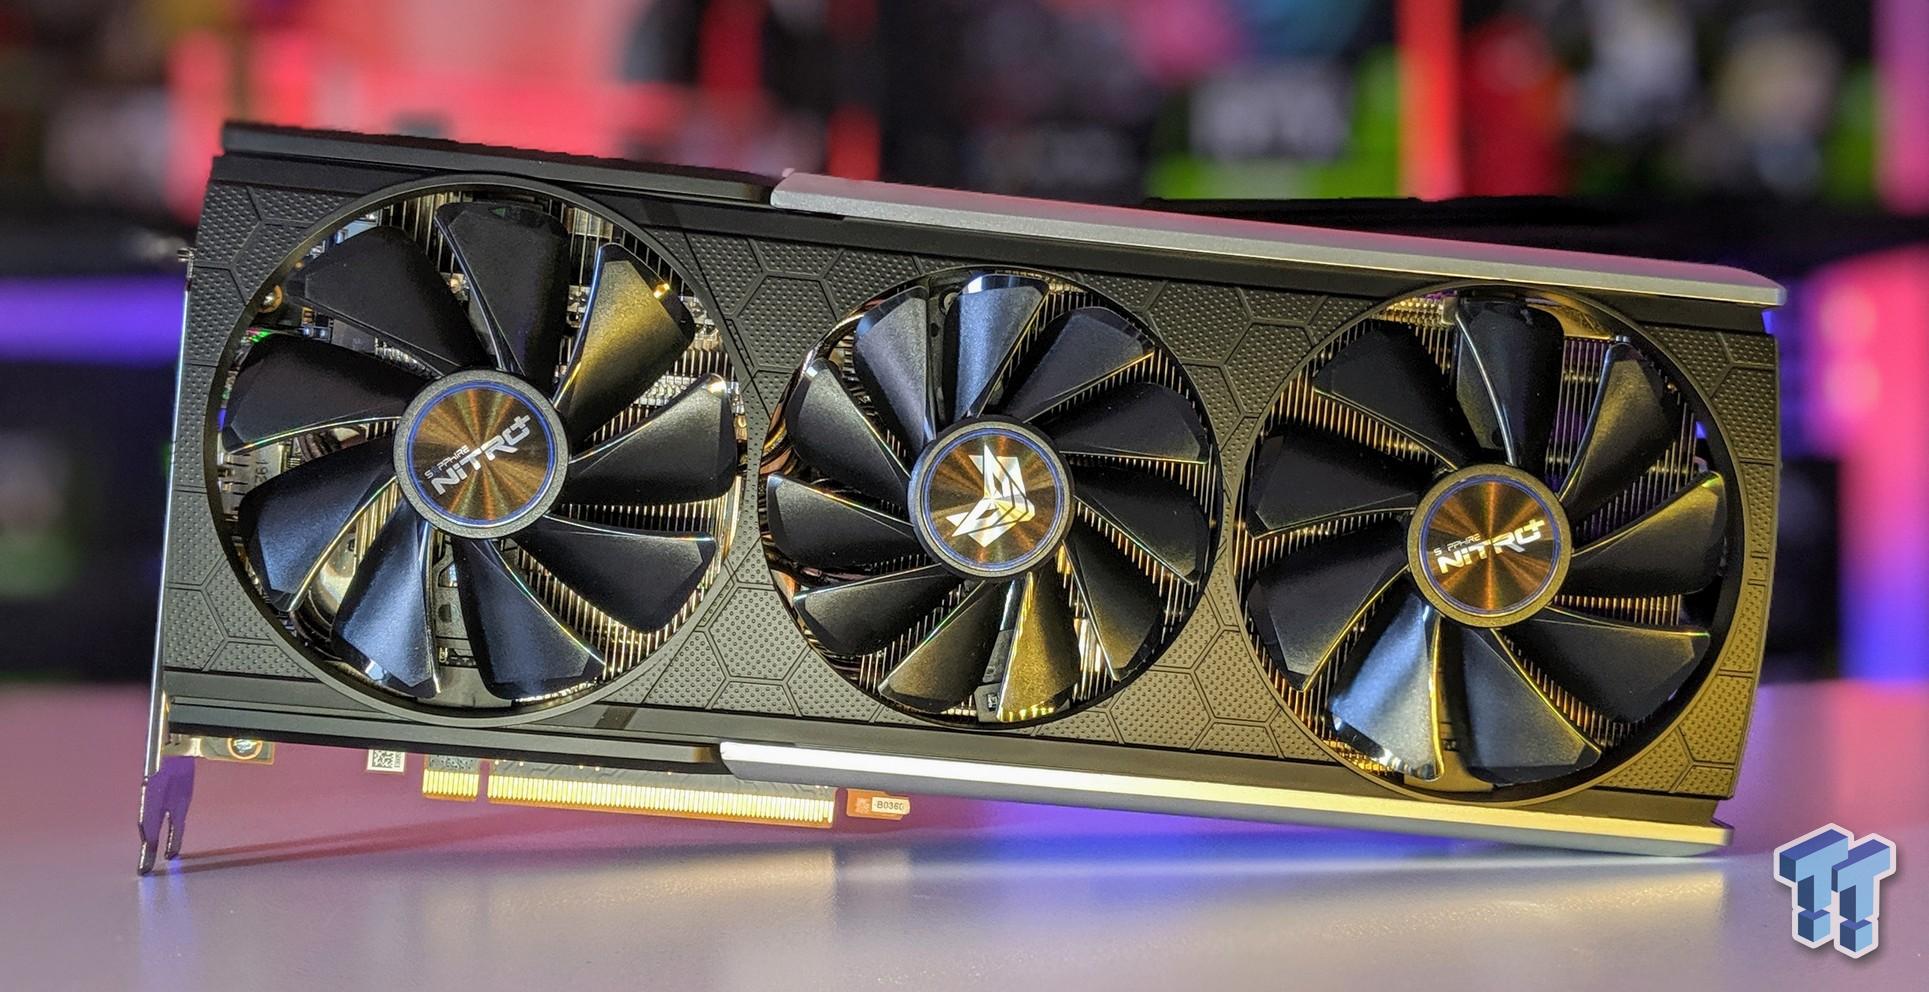 Sapphire Nitro+ Radeon RX 5700 XT review: Superfast and nearly flawless